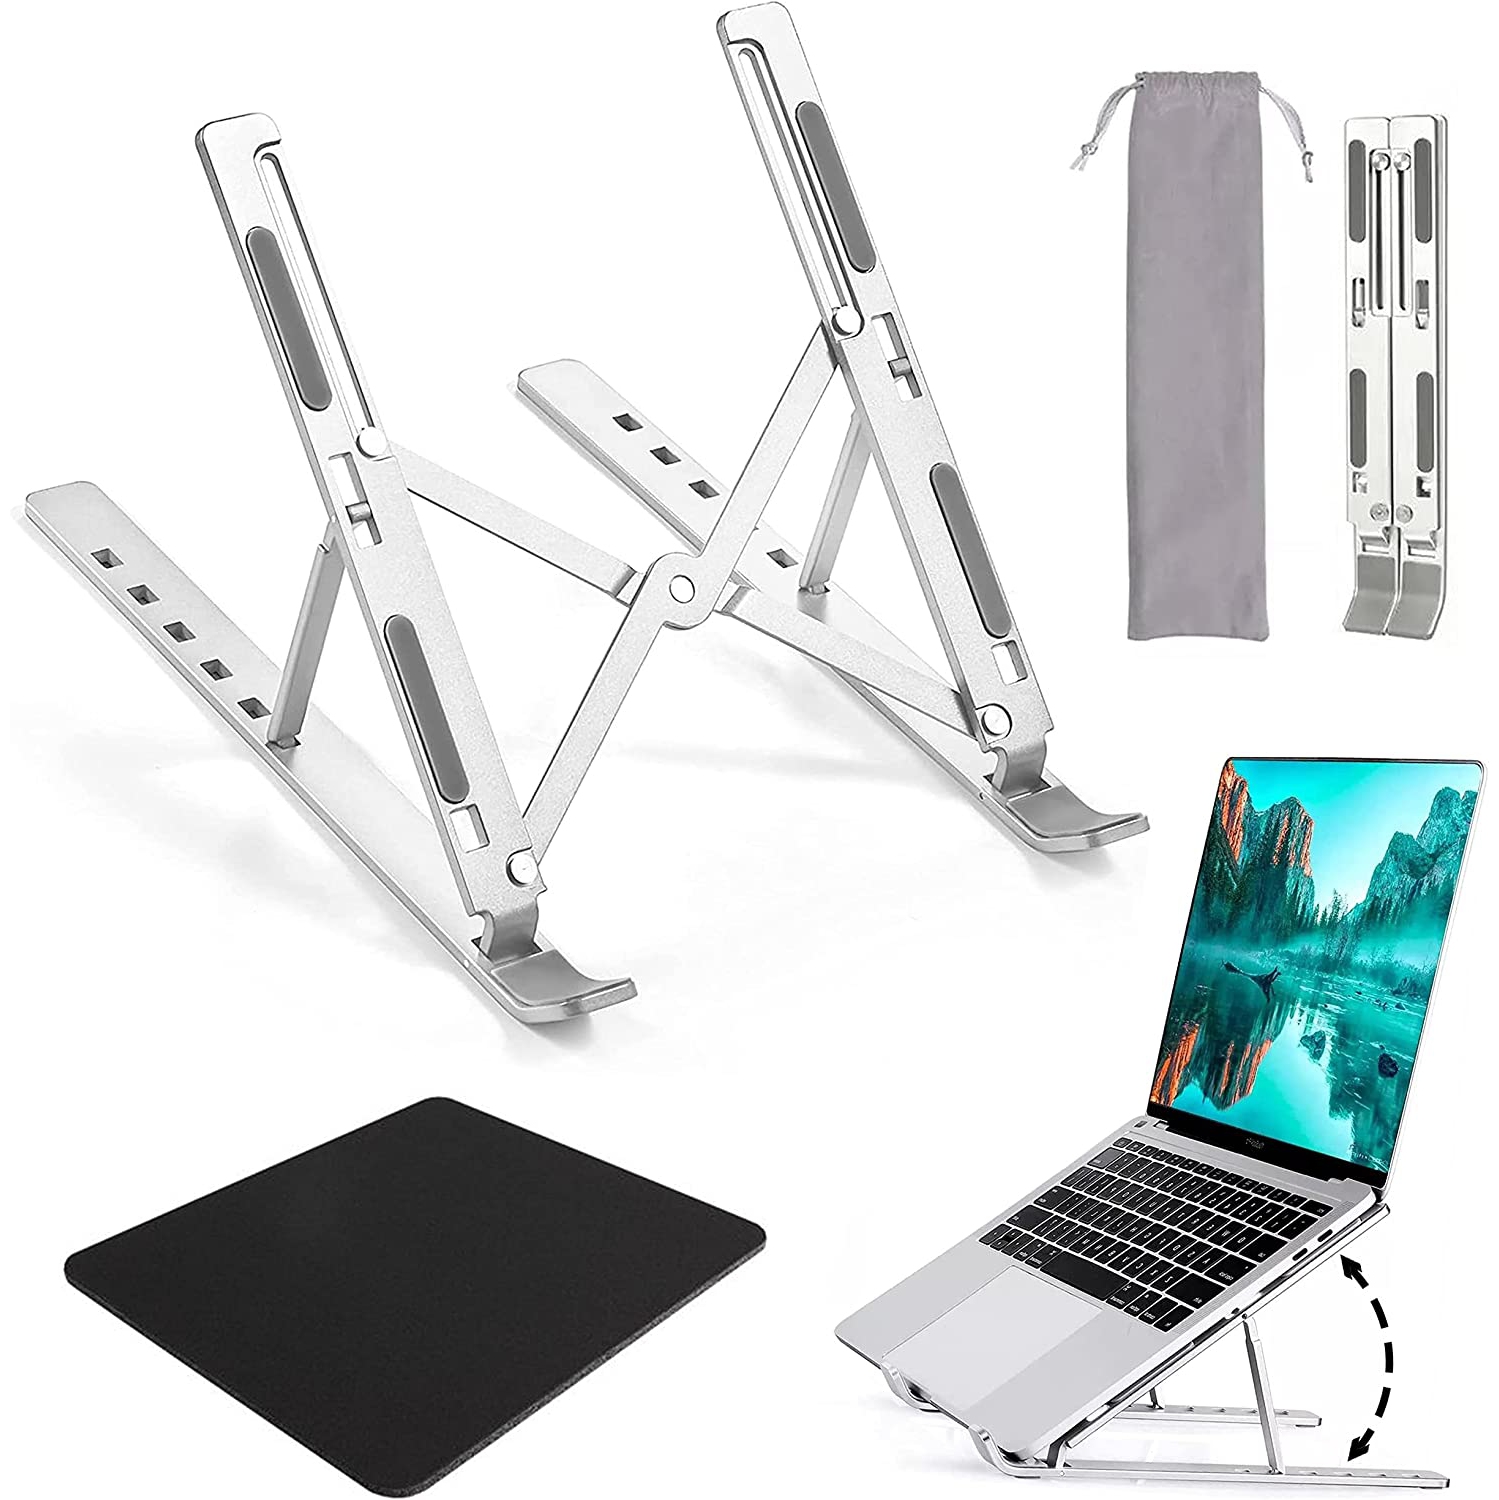 Laptop Stand for Desk with Mousepad Adjustable Anti-Slip Laptop Riser & Holder- Aluminum Support Ordinateur Portable Computer Stand Compatible with MacBook Air/Pro, HP, Len